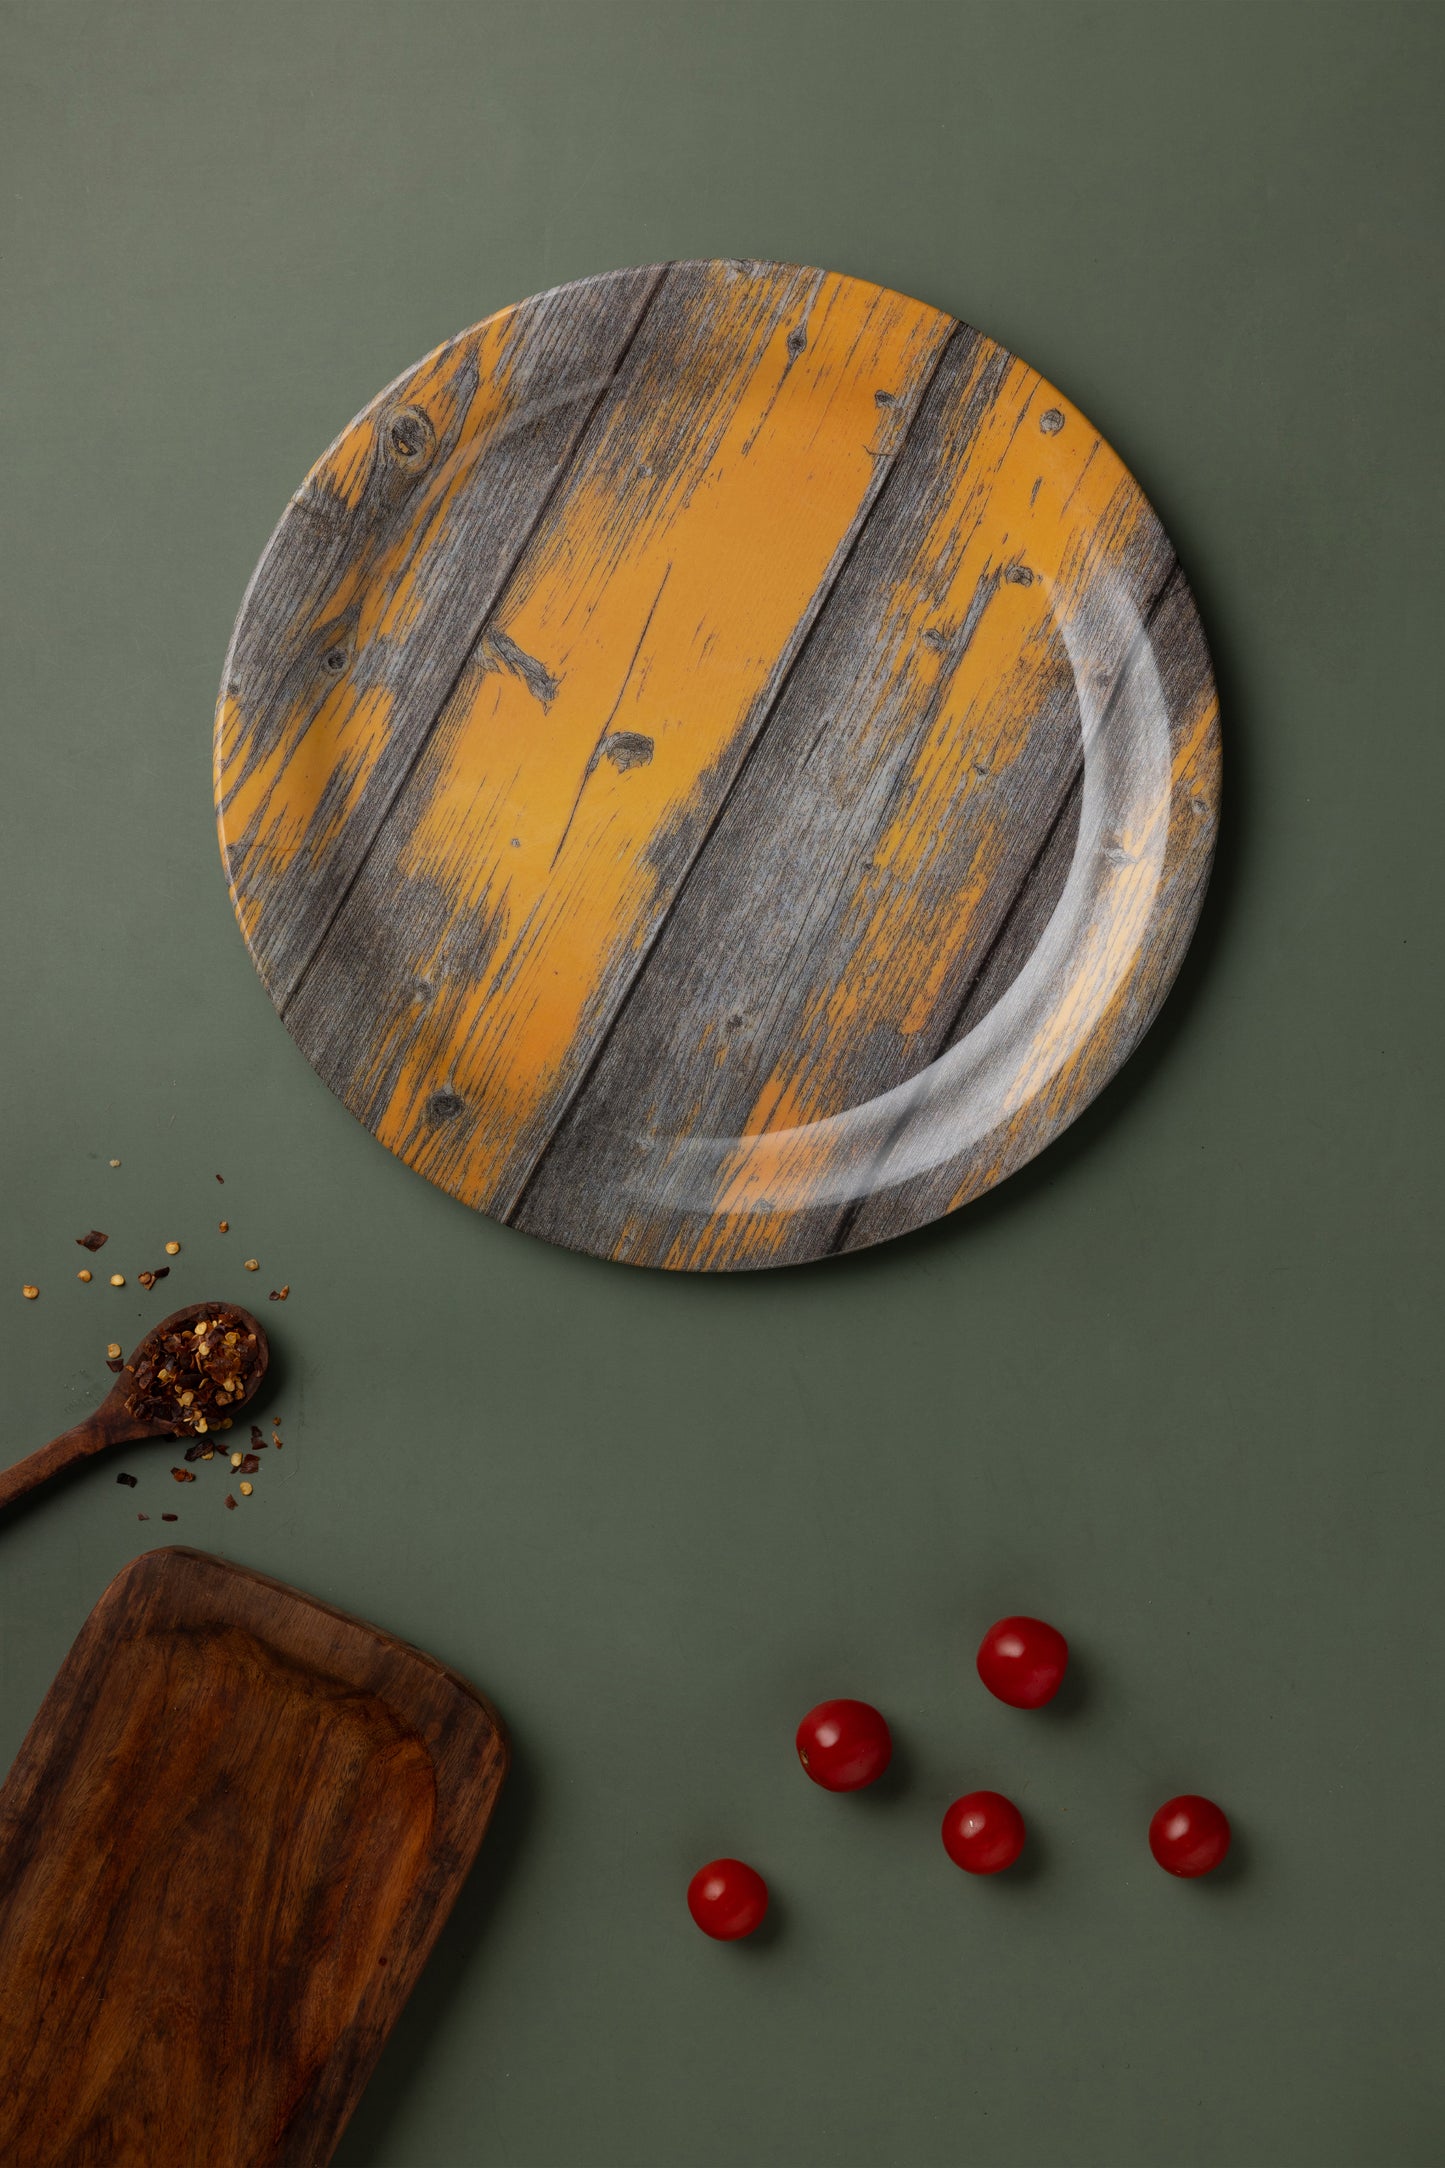 Exclusive 11" Dinner/Lunch Unbreakable Lightweight Melamine Round Rugged Full-Size Plate.